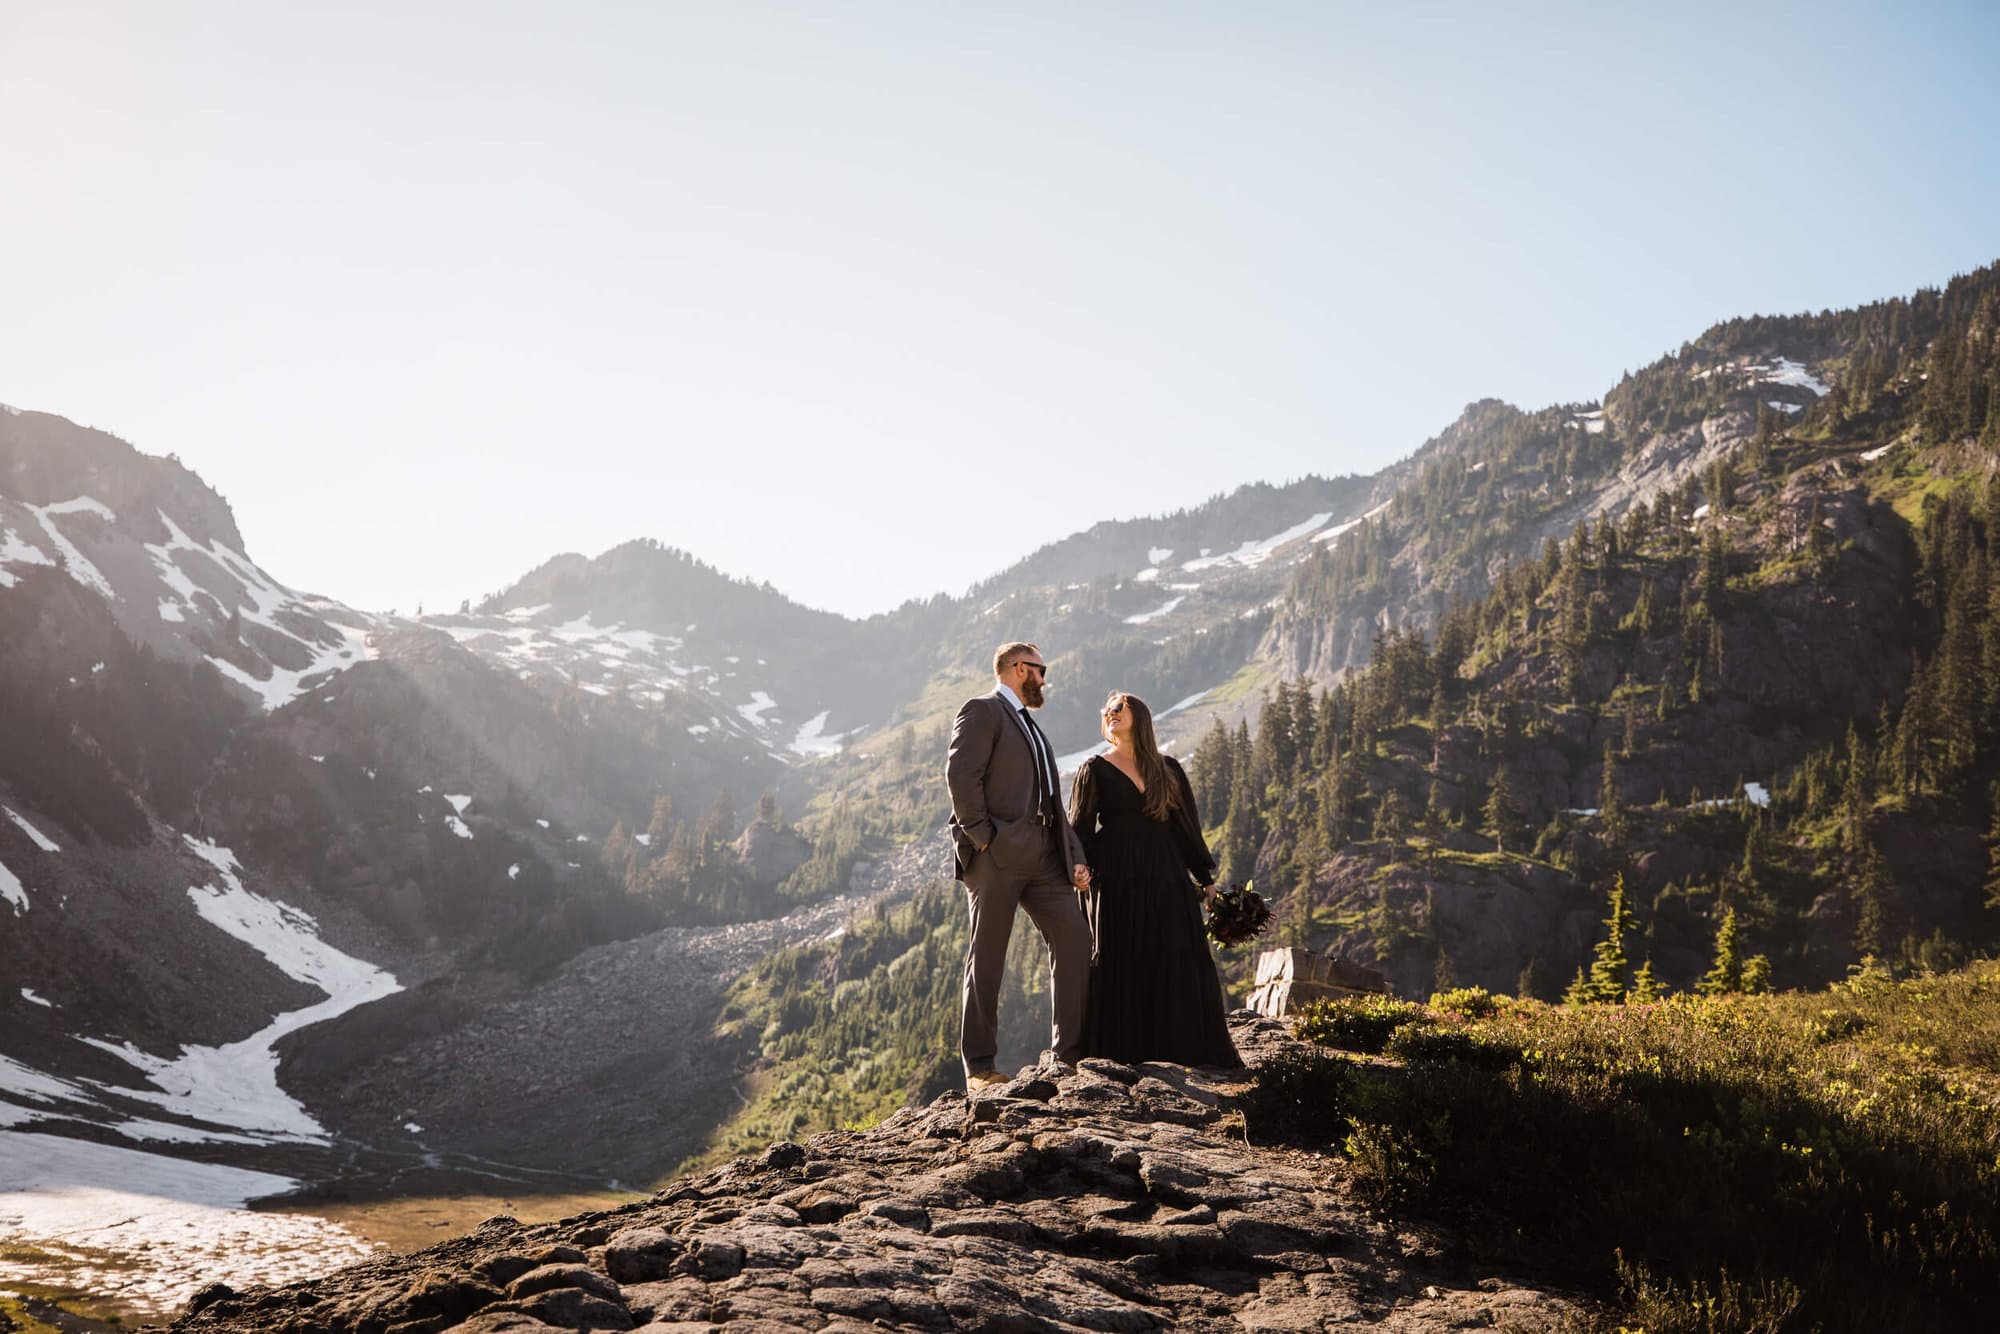 Check out this breathtaking and intimate North Cascades elopement. With a striking black wedding dress set against the snow-capped mountains, this isn't one to miss. 